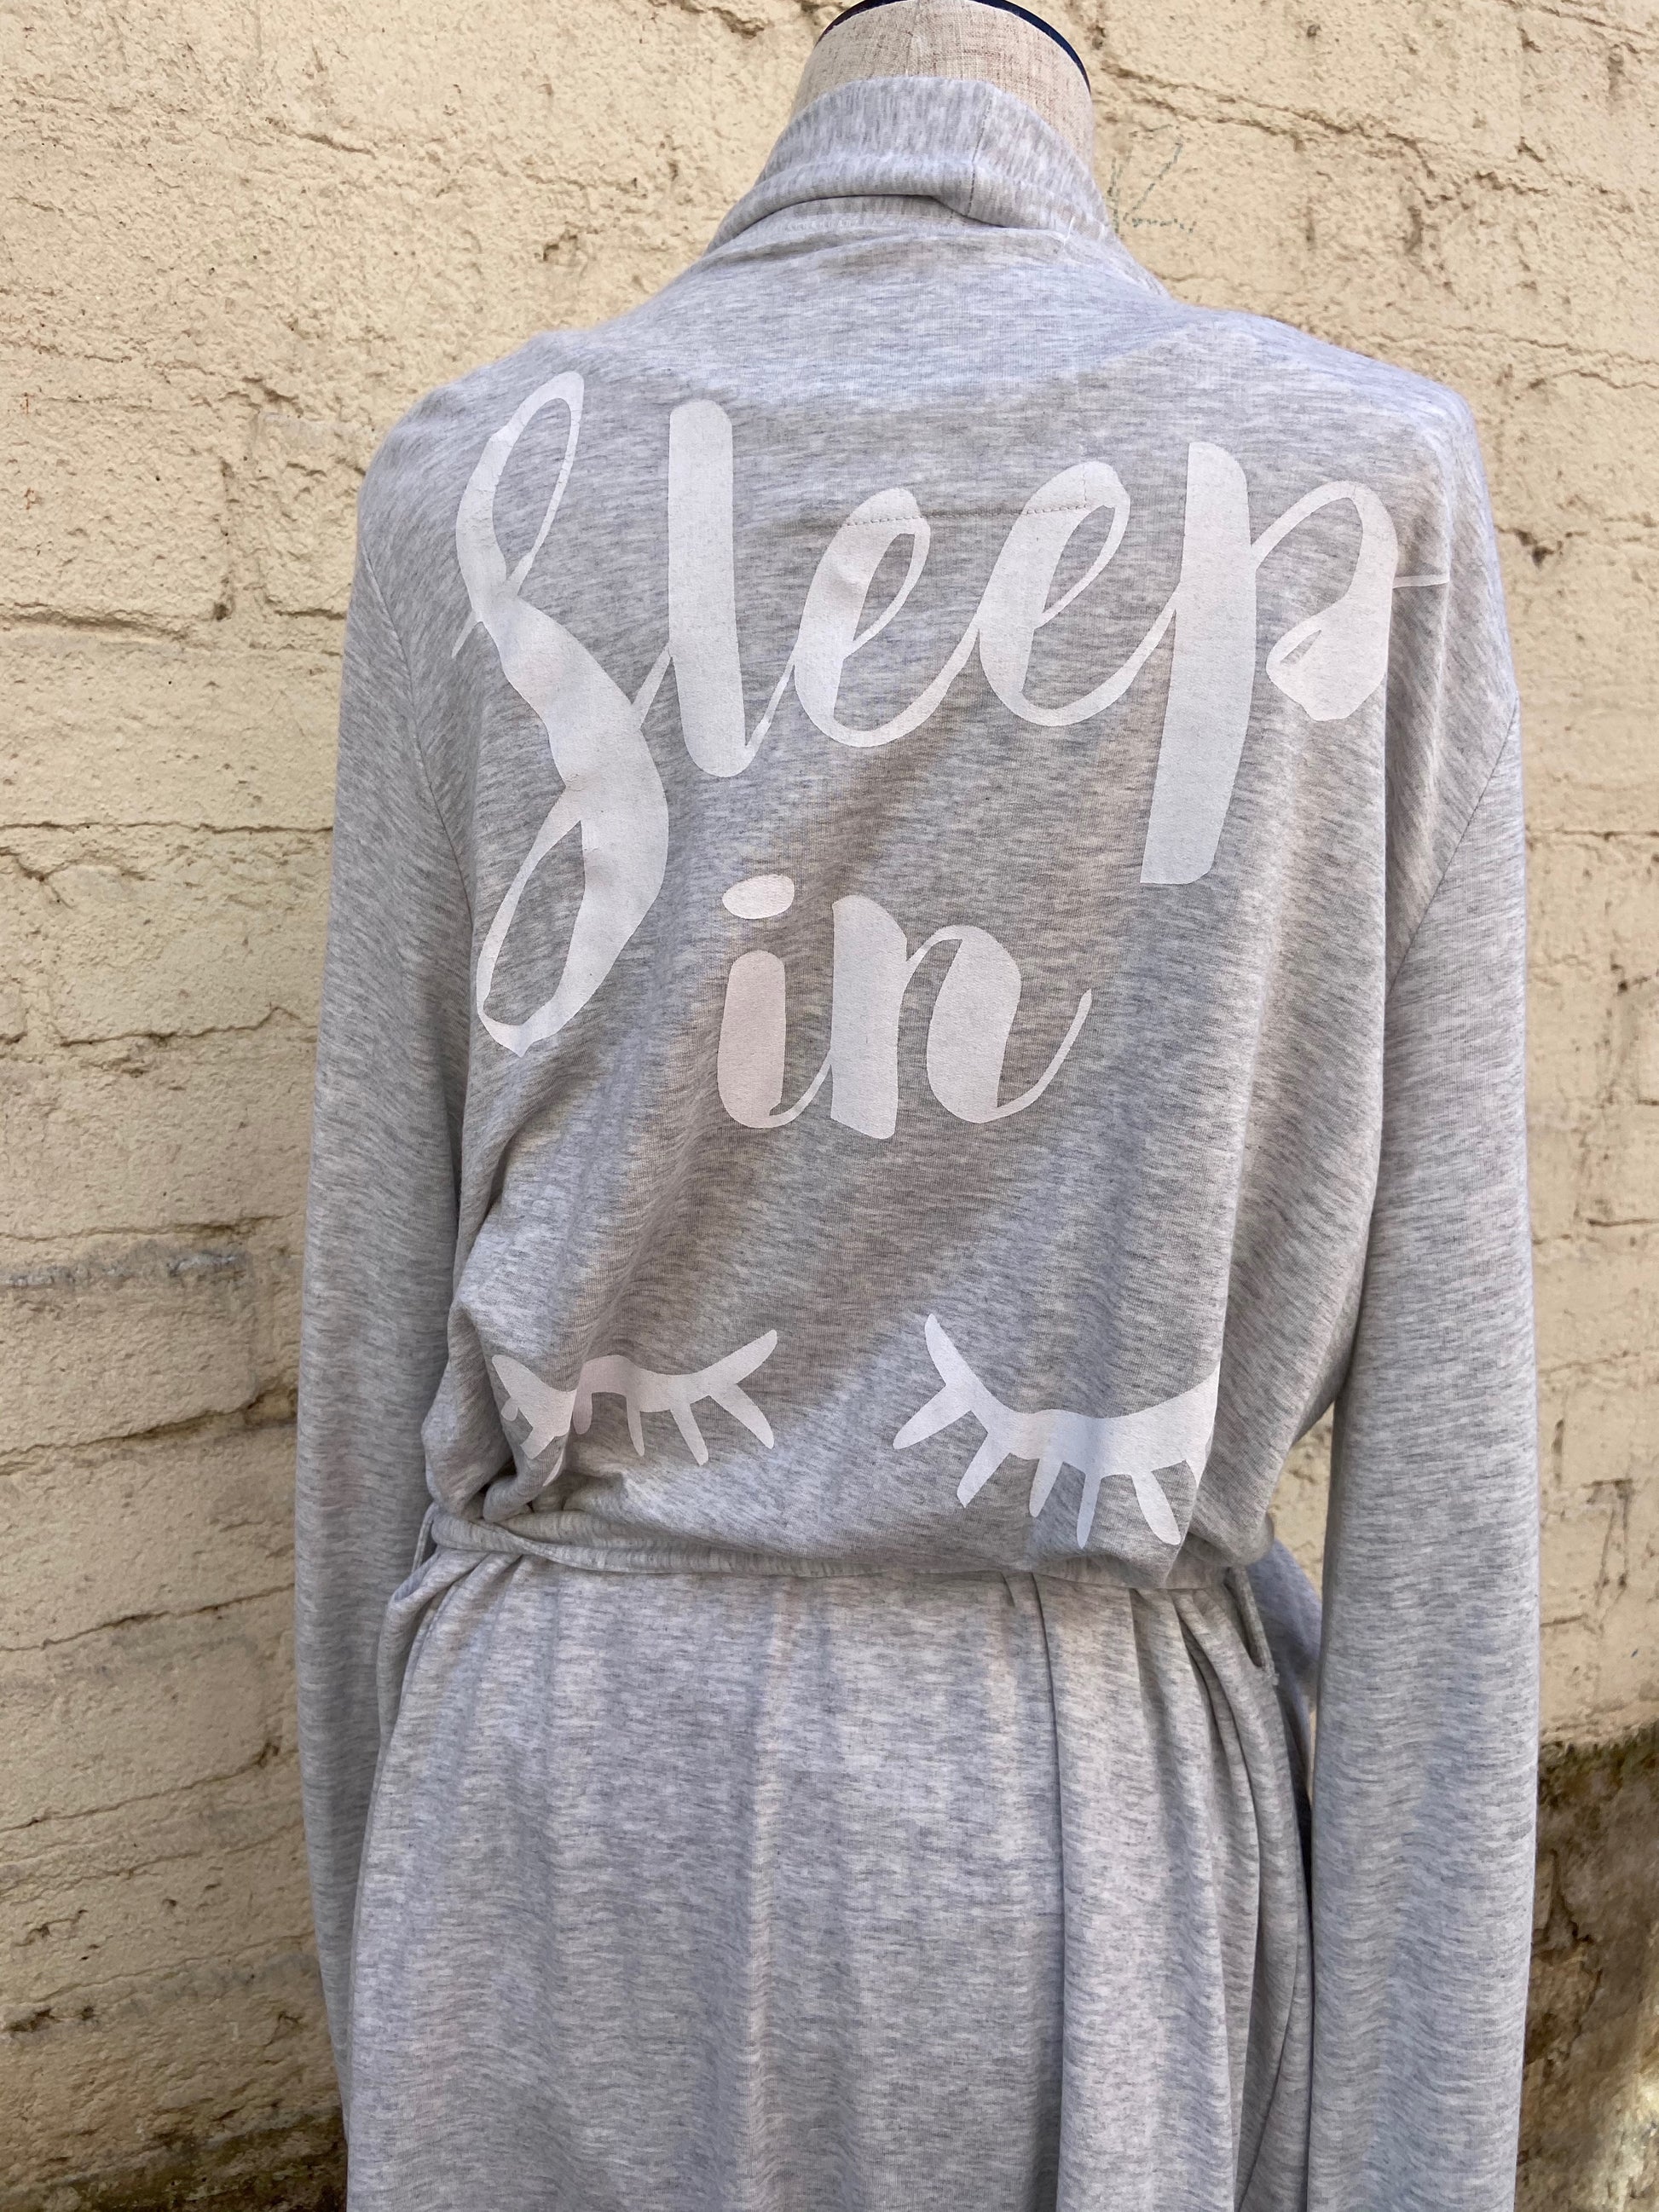 Relaxed fit, pebble grey robe. 95% Modal/5% Spandex. Back of robe has words that read, "Sleep in".